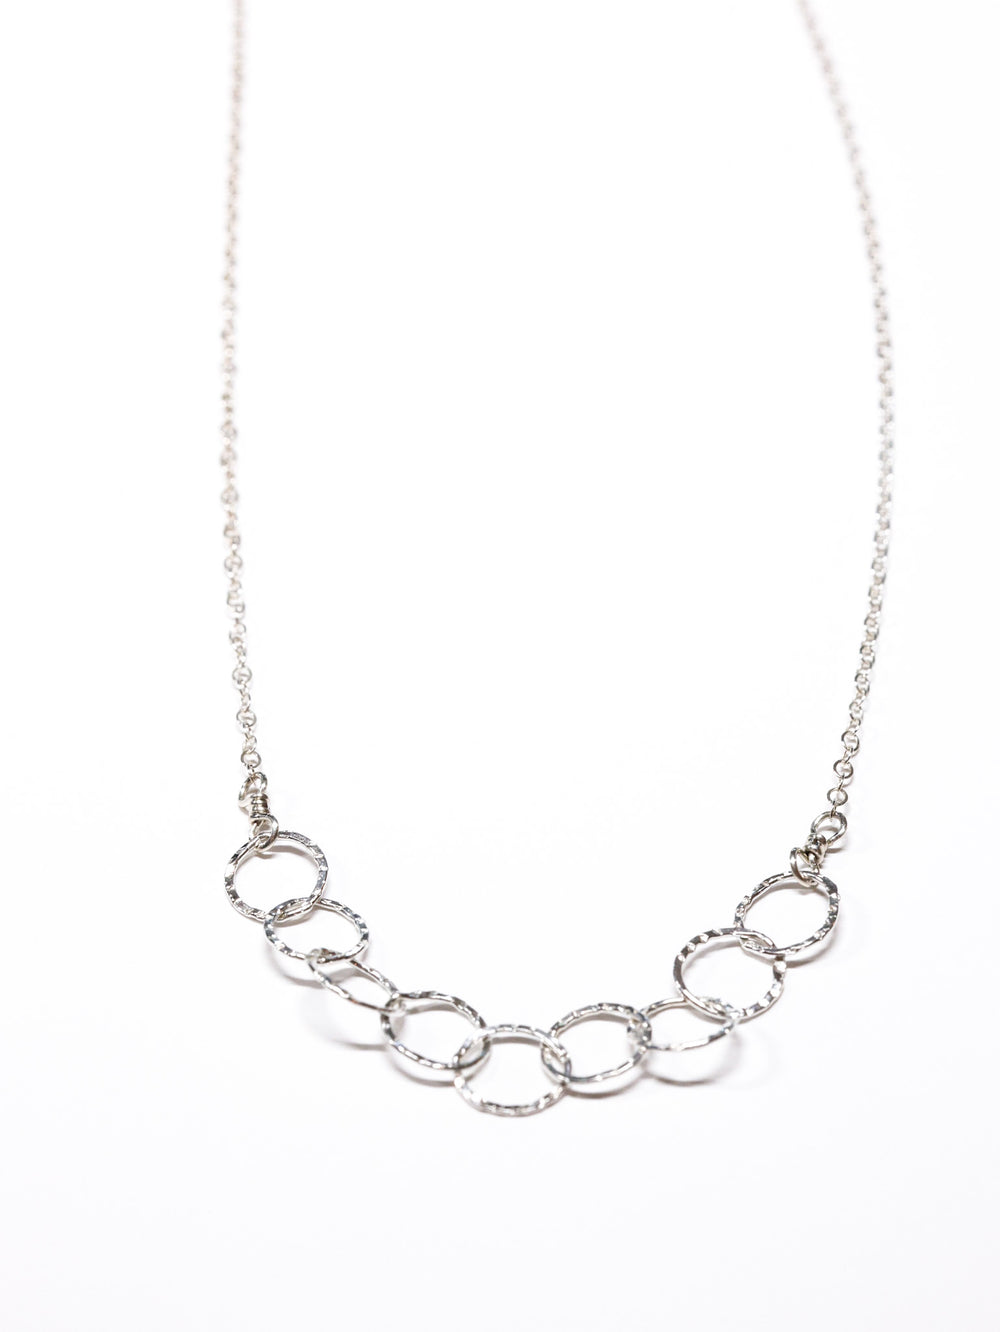 Smaller Circles Necklace -Sterling Silver